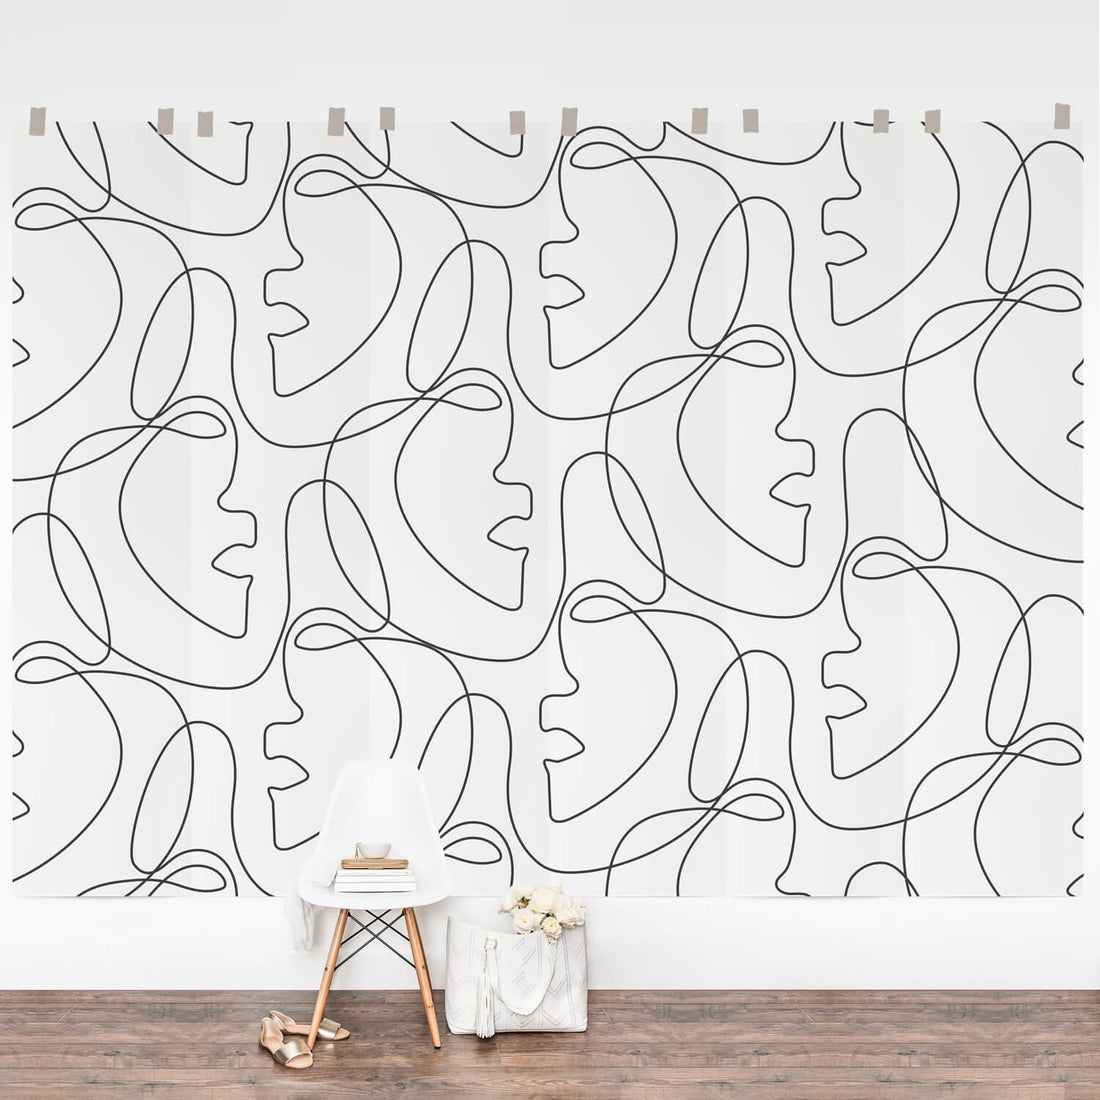 Modern design line face wall mural in removable wallpaper material